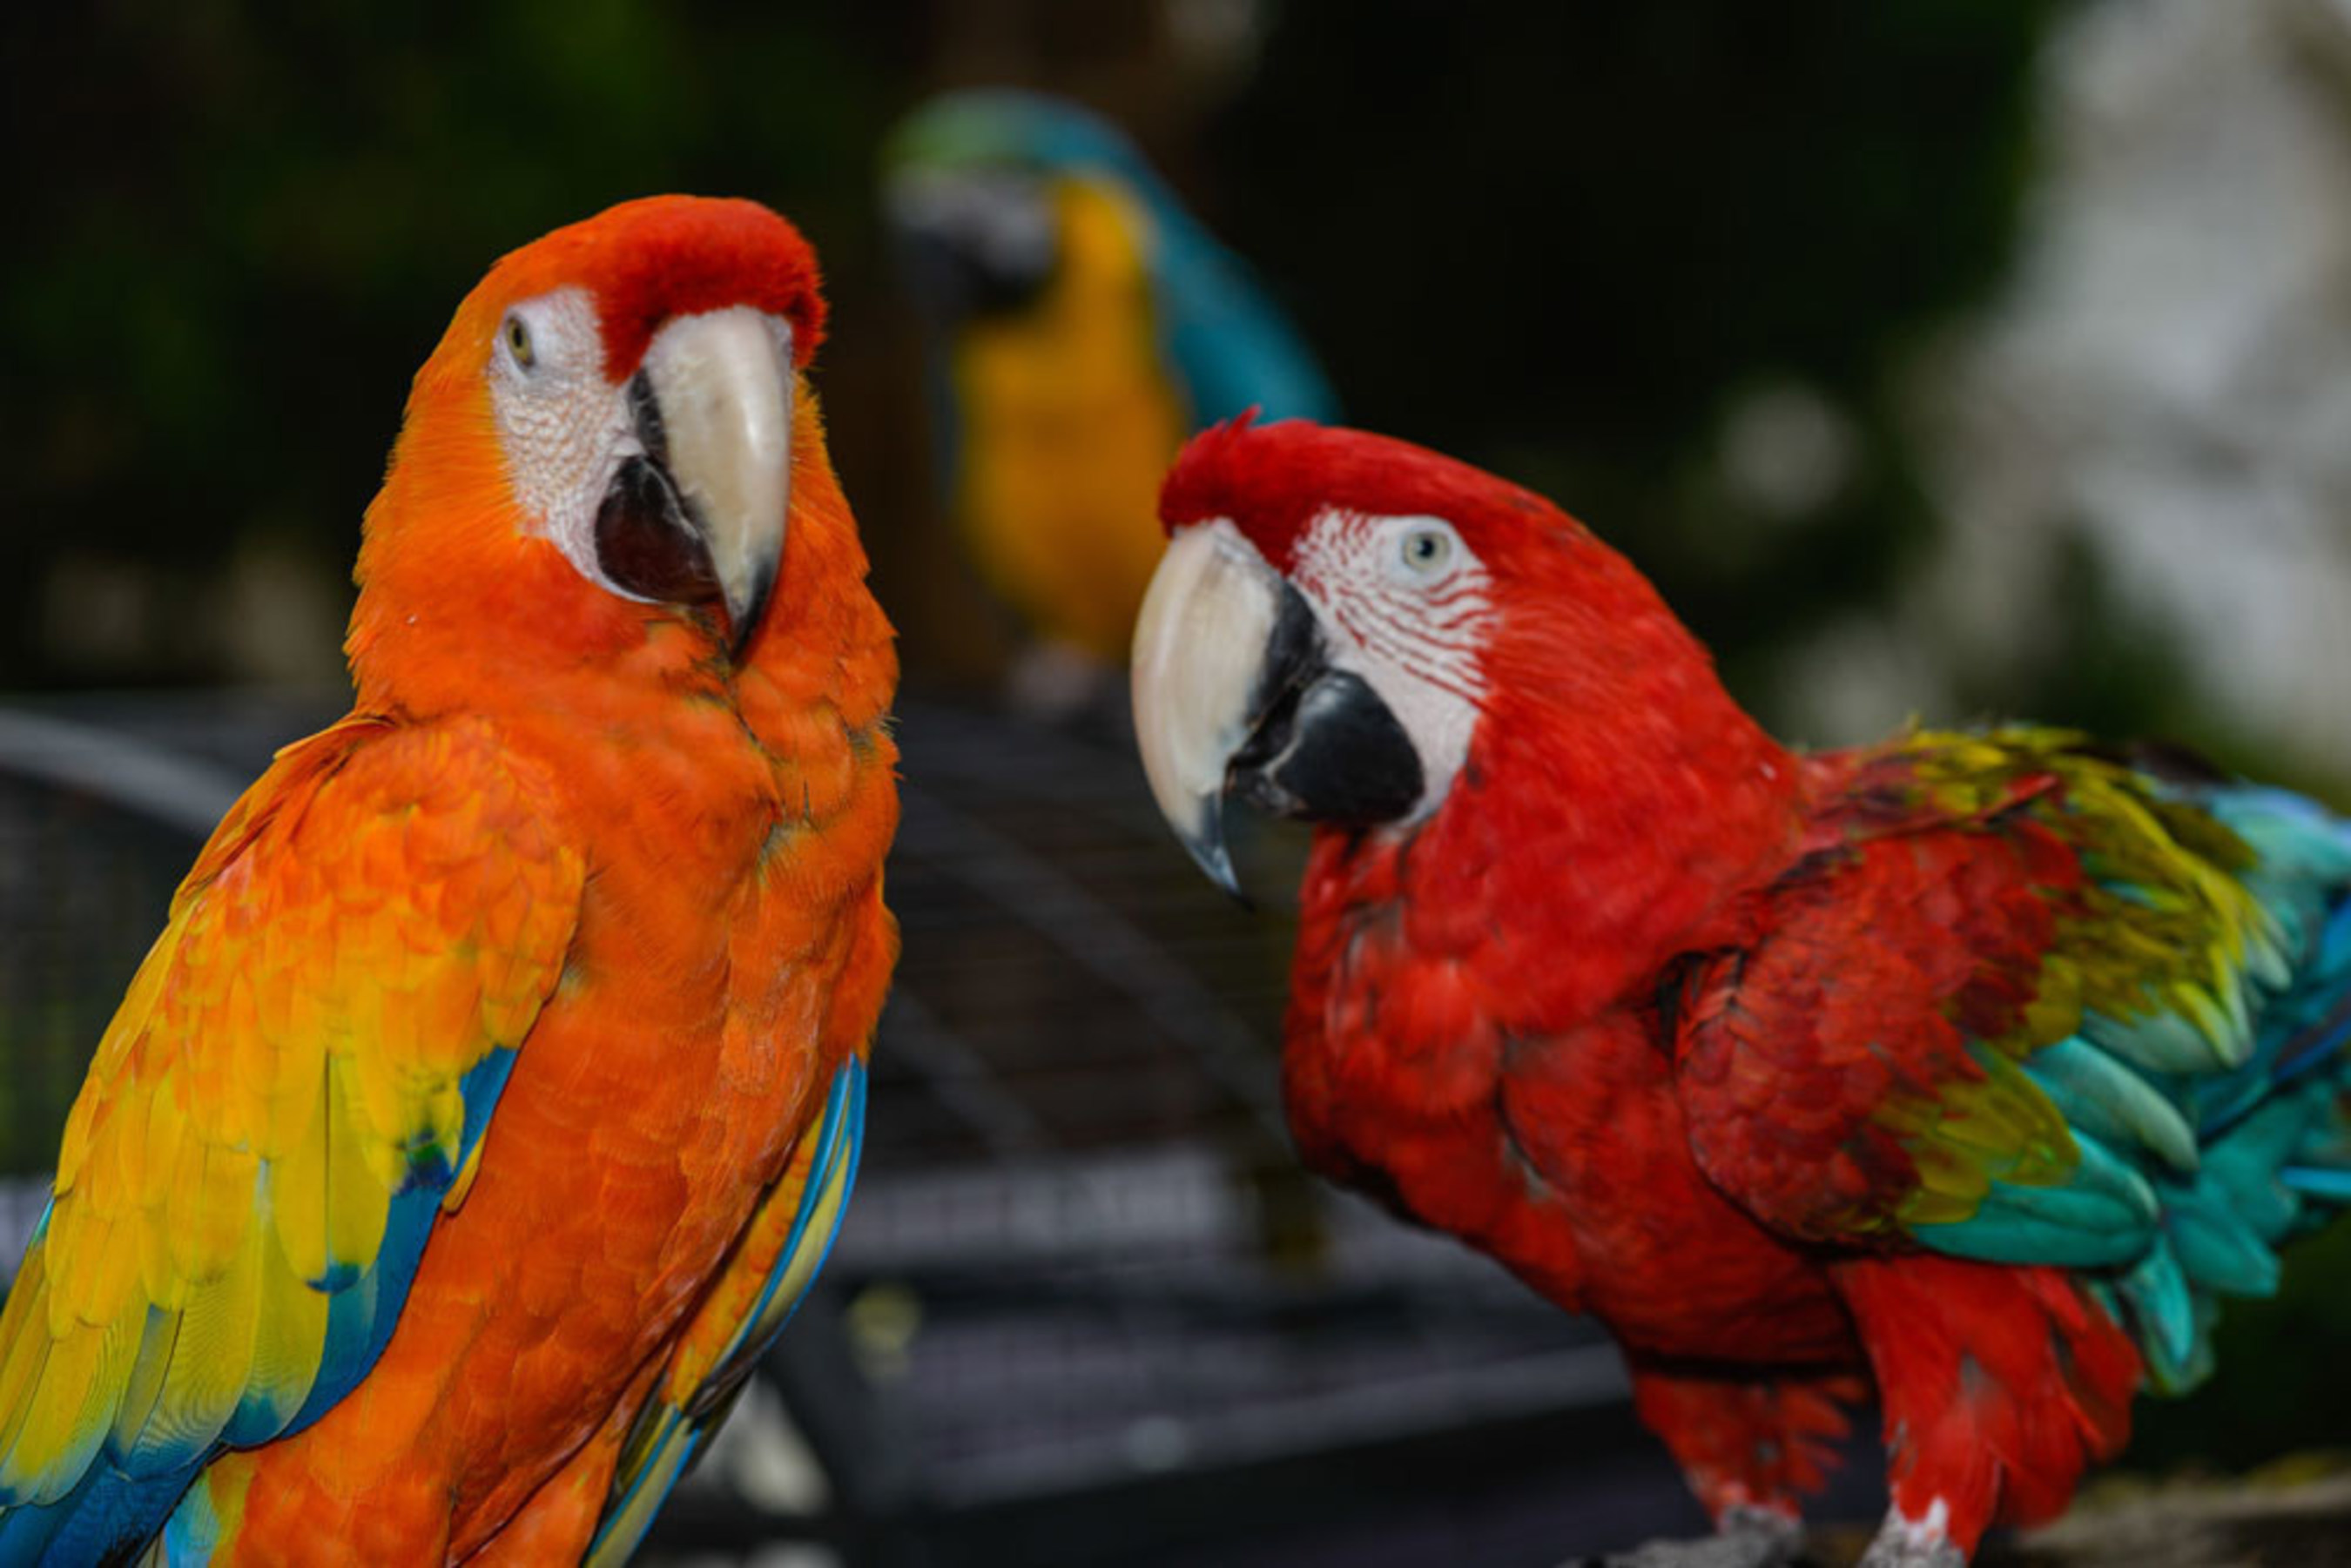 Horseshoe Bay Resort is celebrating the birthdays of two of it's featured attractions. Apple, a Green-winged Macaw, and Sunshine, a Capri Macaw, have been with the resort for over 10-years. The birthday celebration starts this Saturday at 9 a.m. the resort's Palm D'or Pavilion.